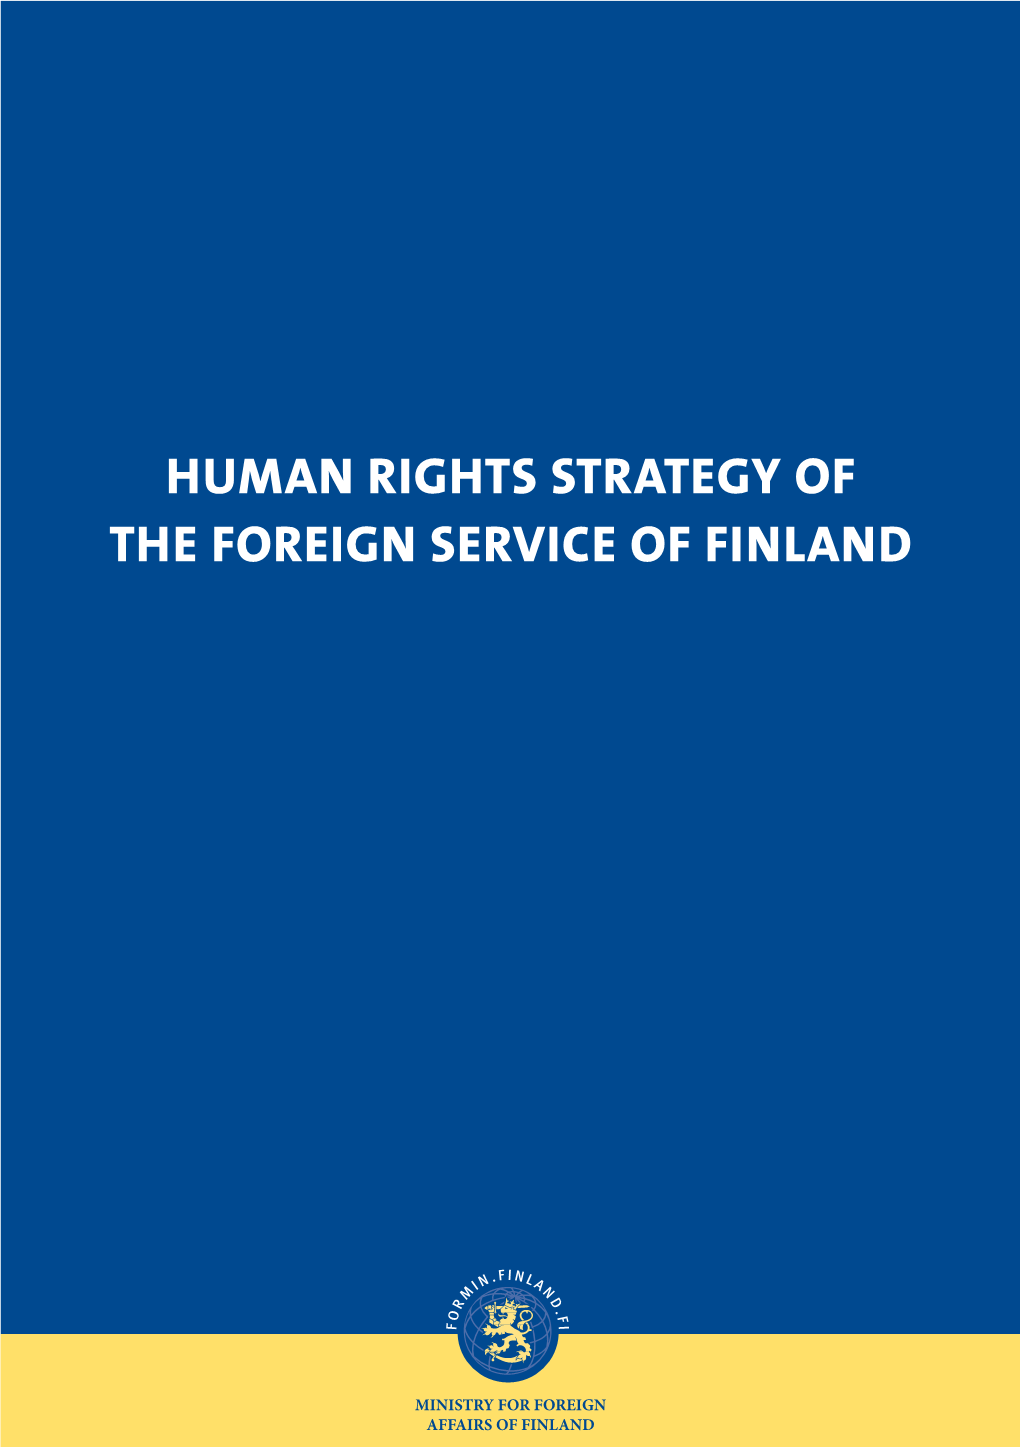 Human Rights Strategy of the Foreign Service of Finland